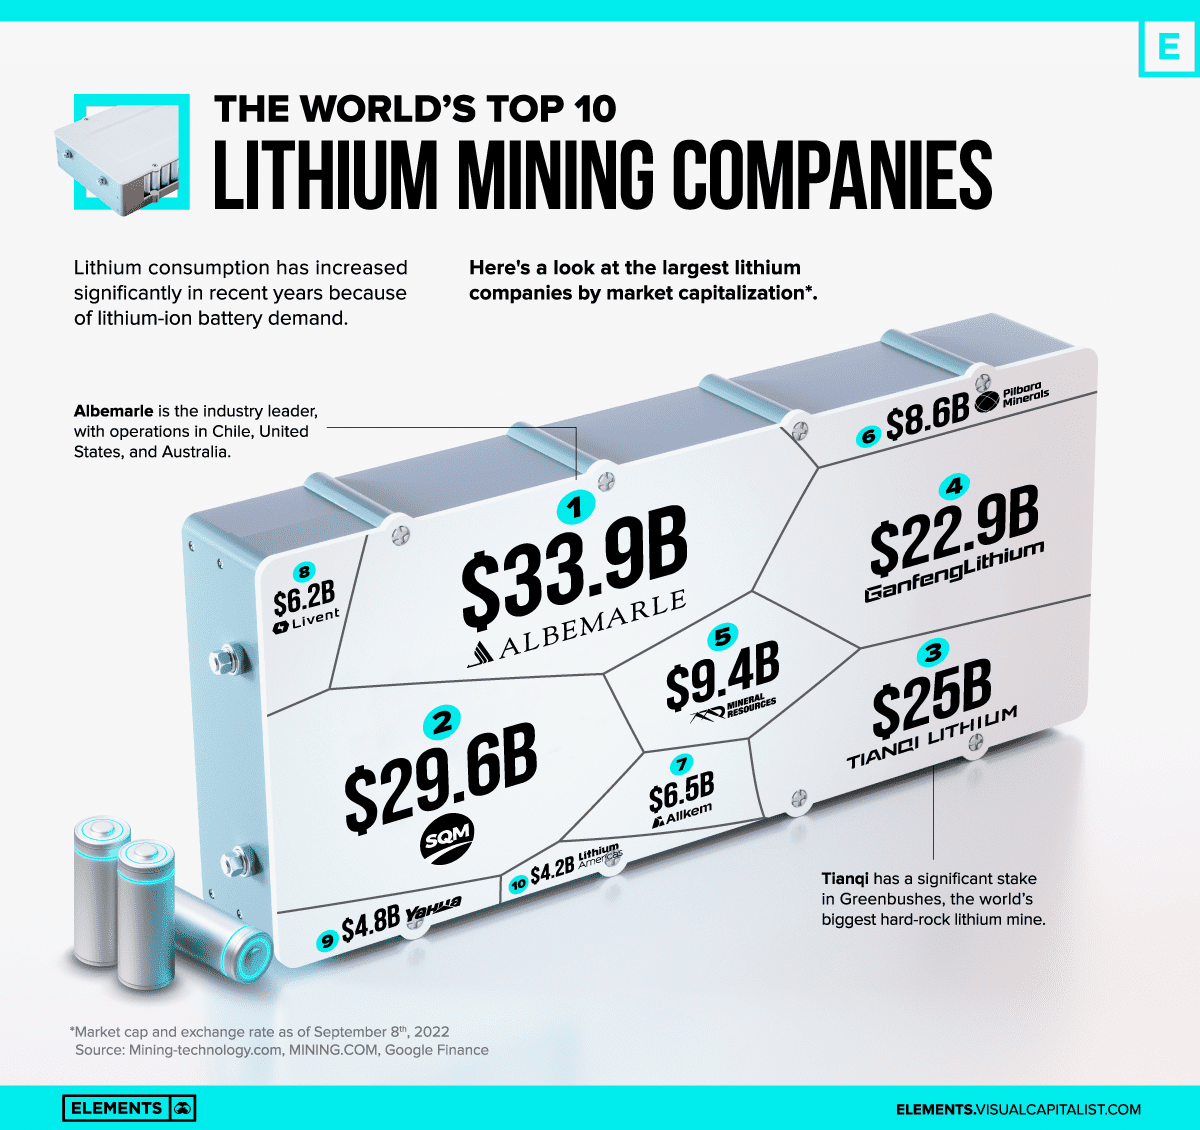 The World’s Top 10 Lithium Mining Companies